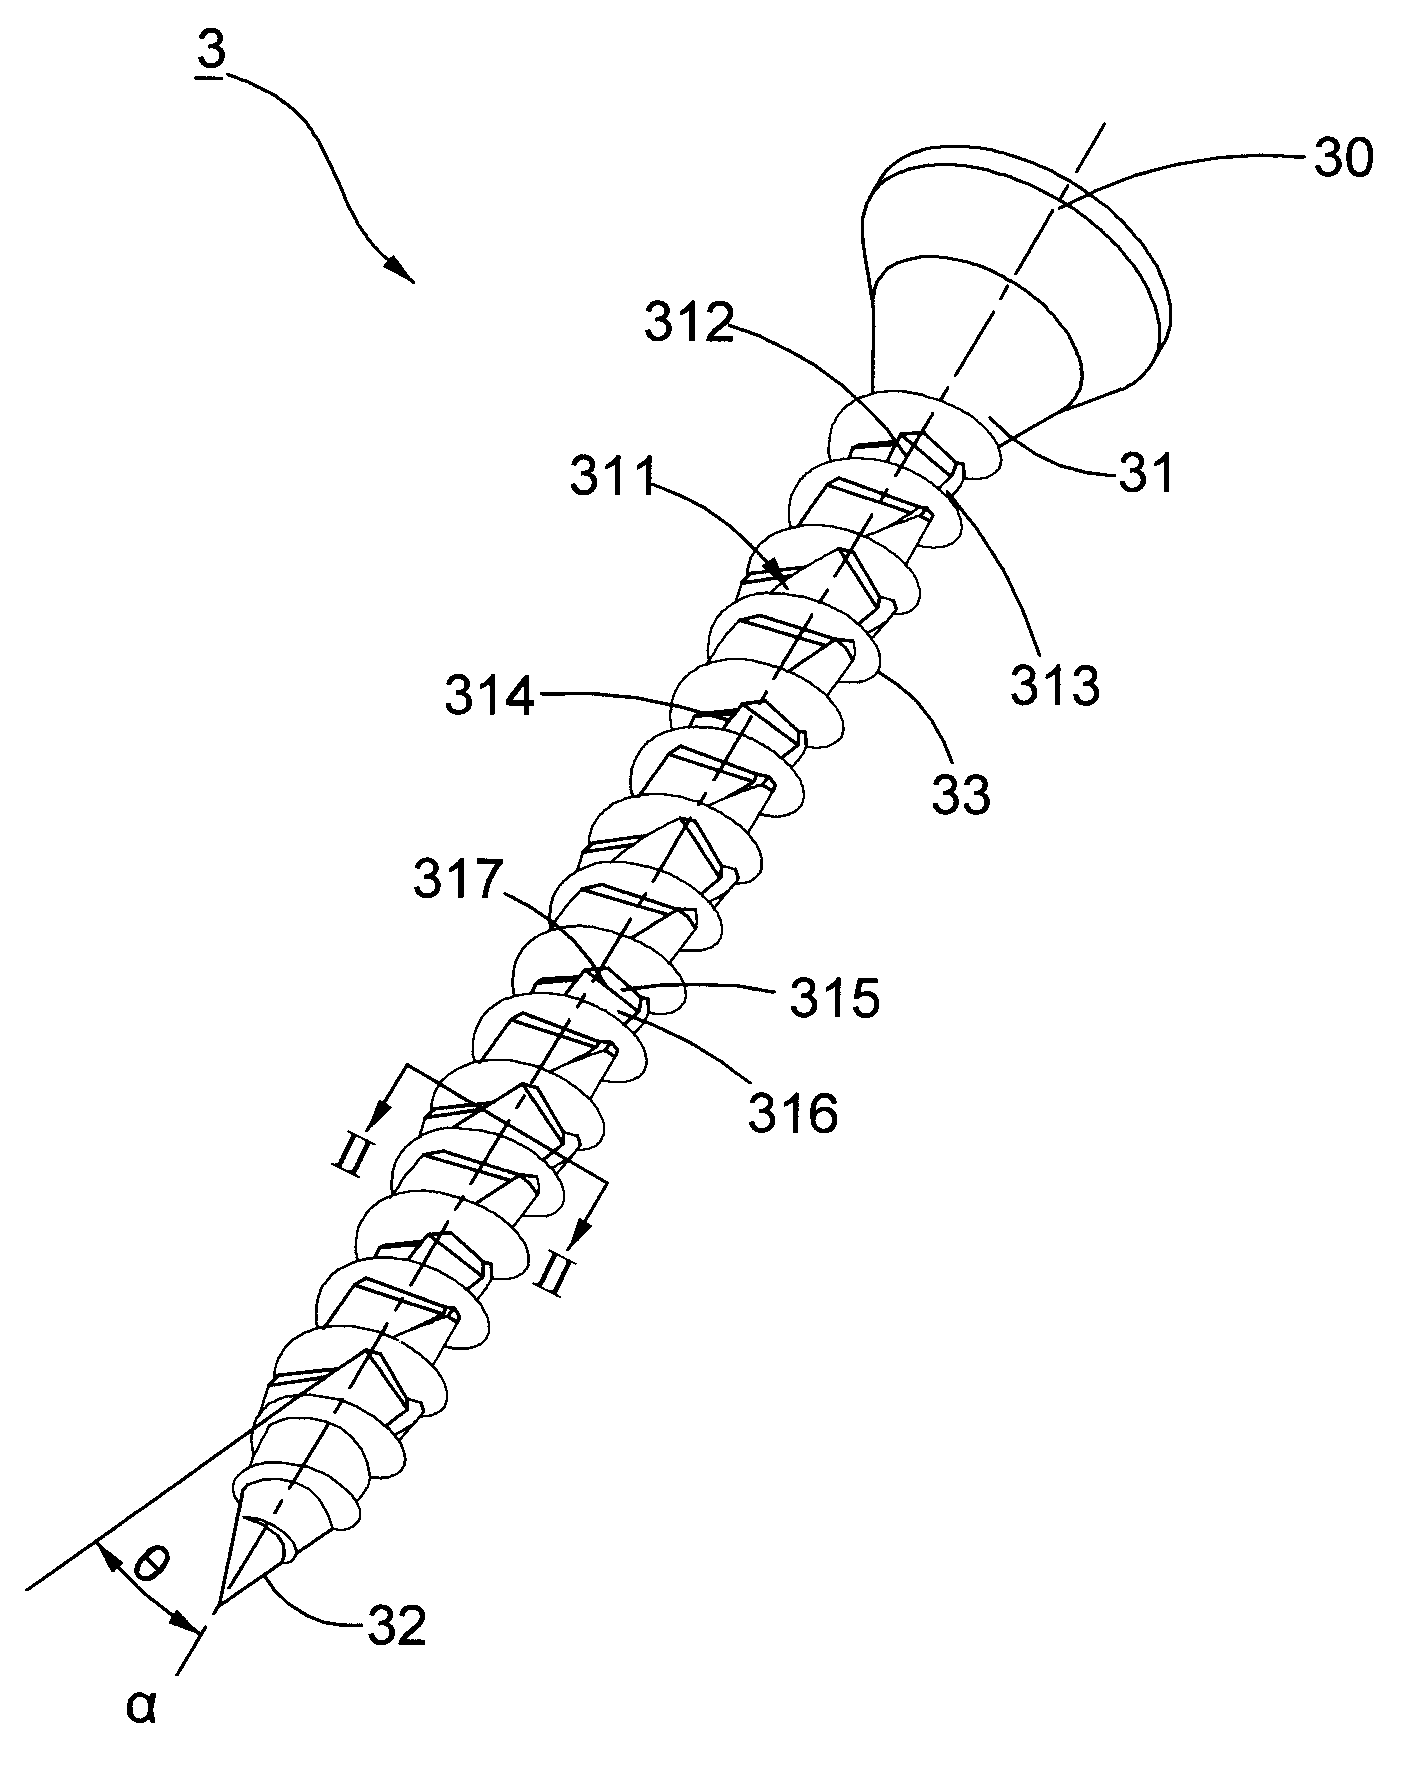 Screw for use in nonmetal objects